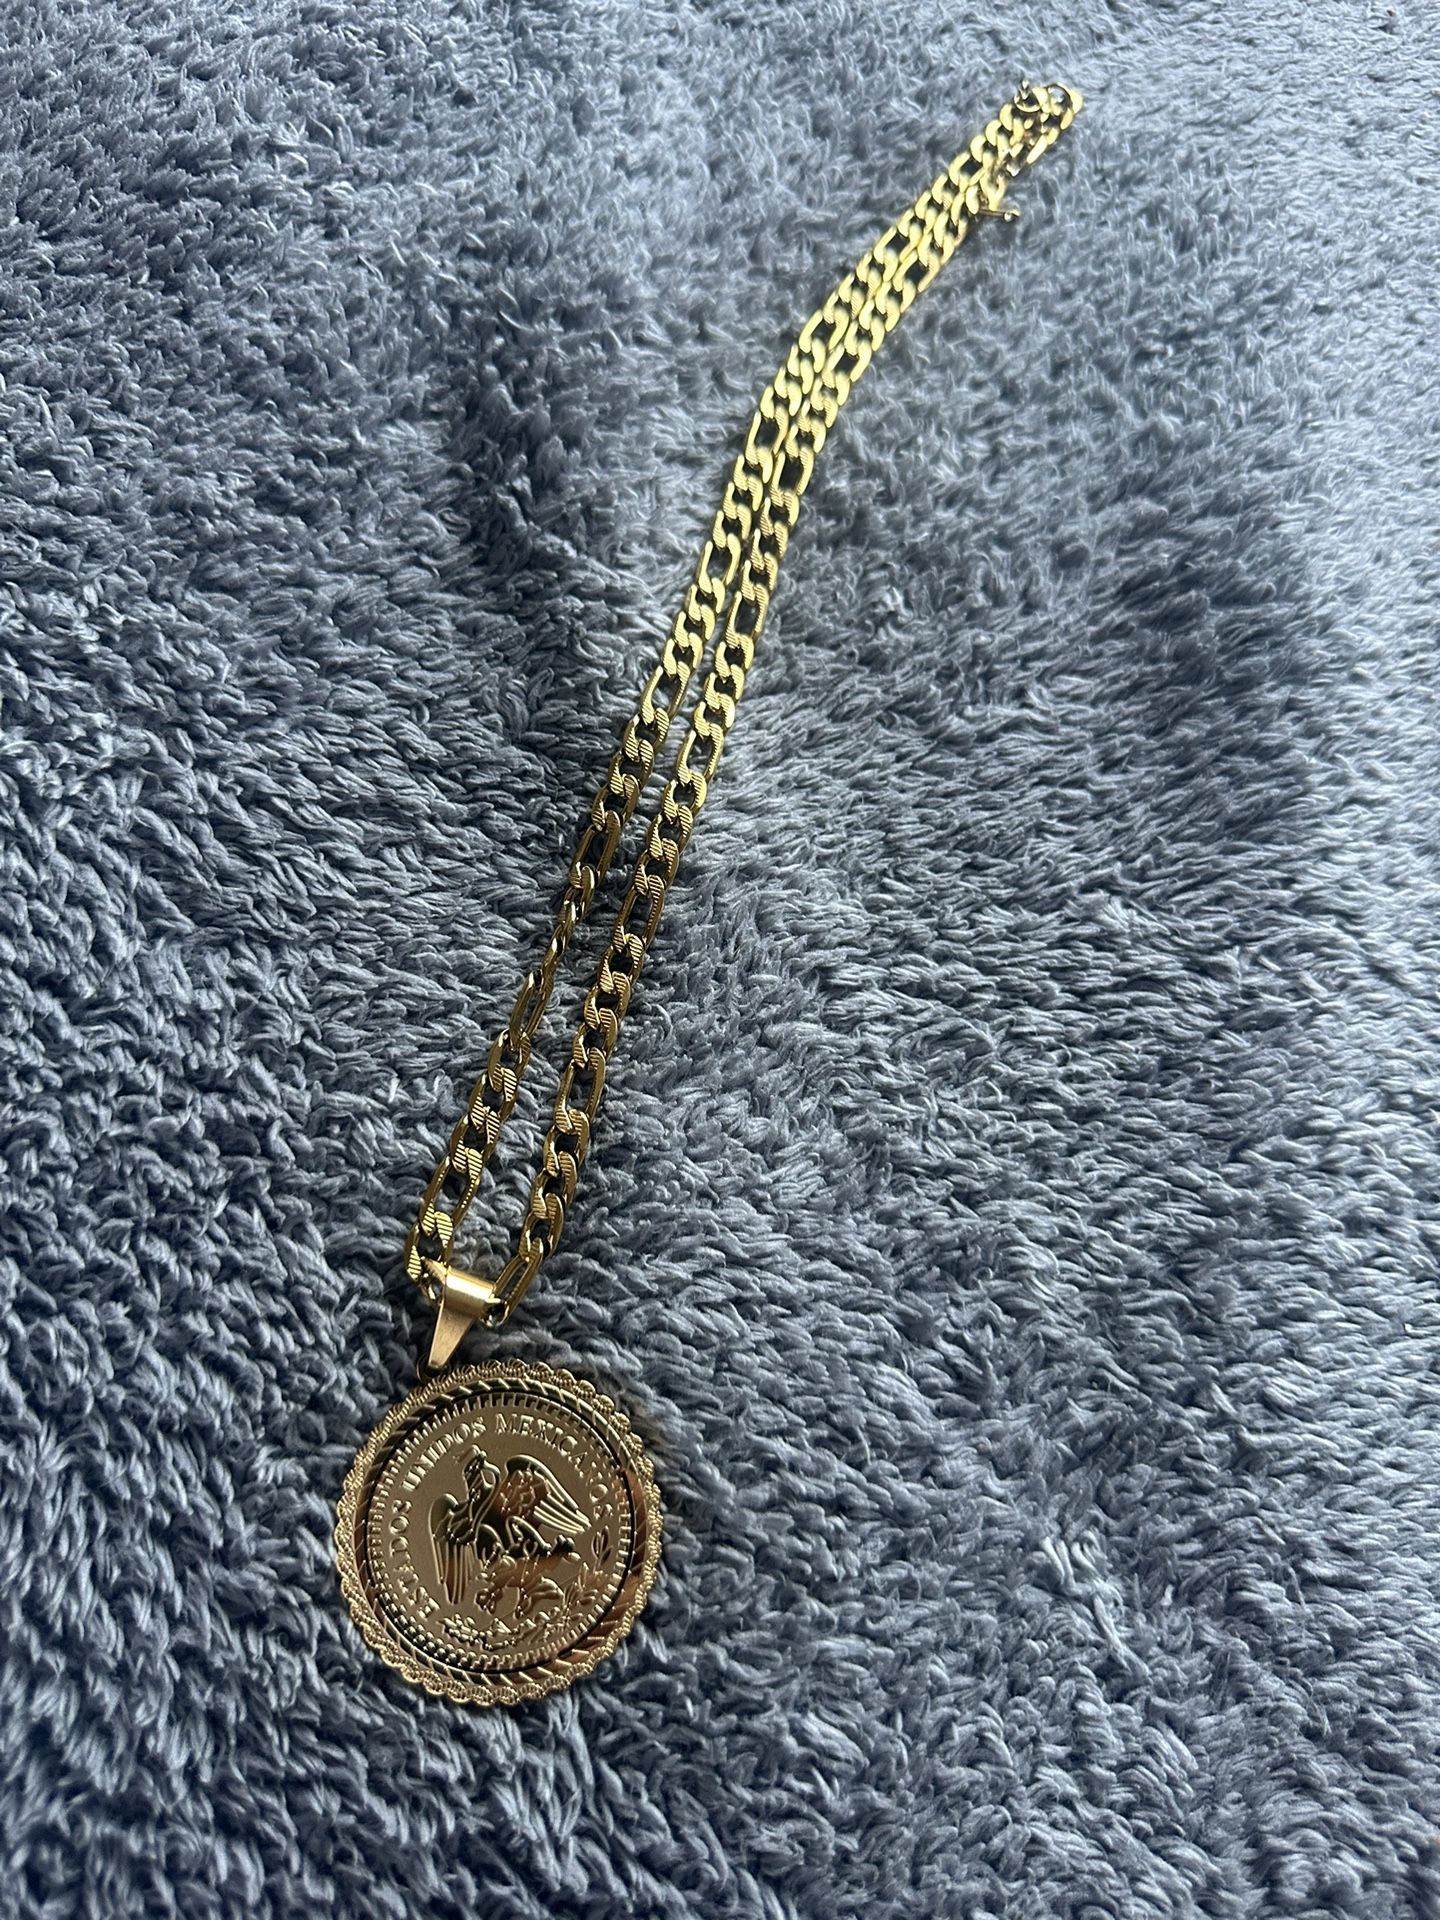 22k oroginal centenario coin with Bezel pendant comes with fígaro chain size 23